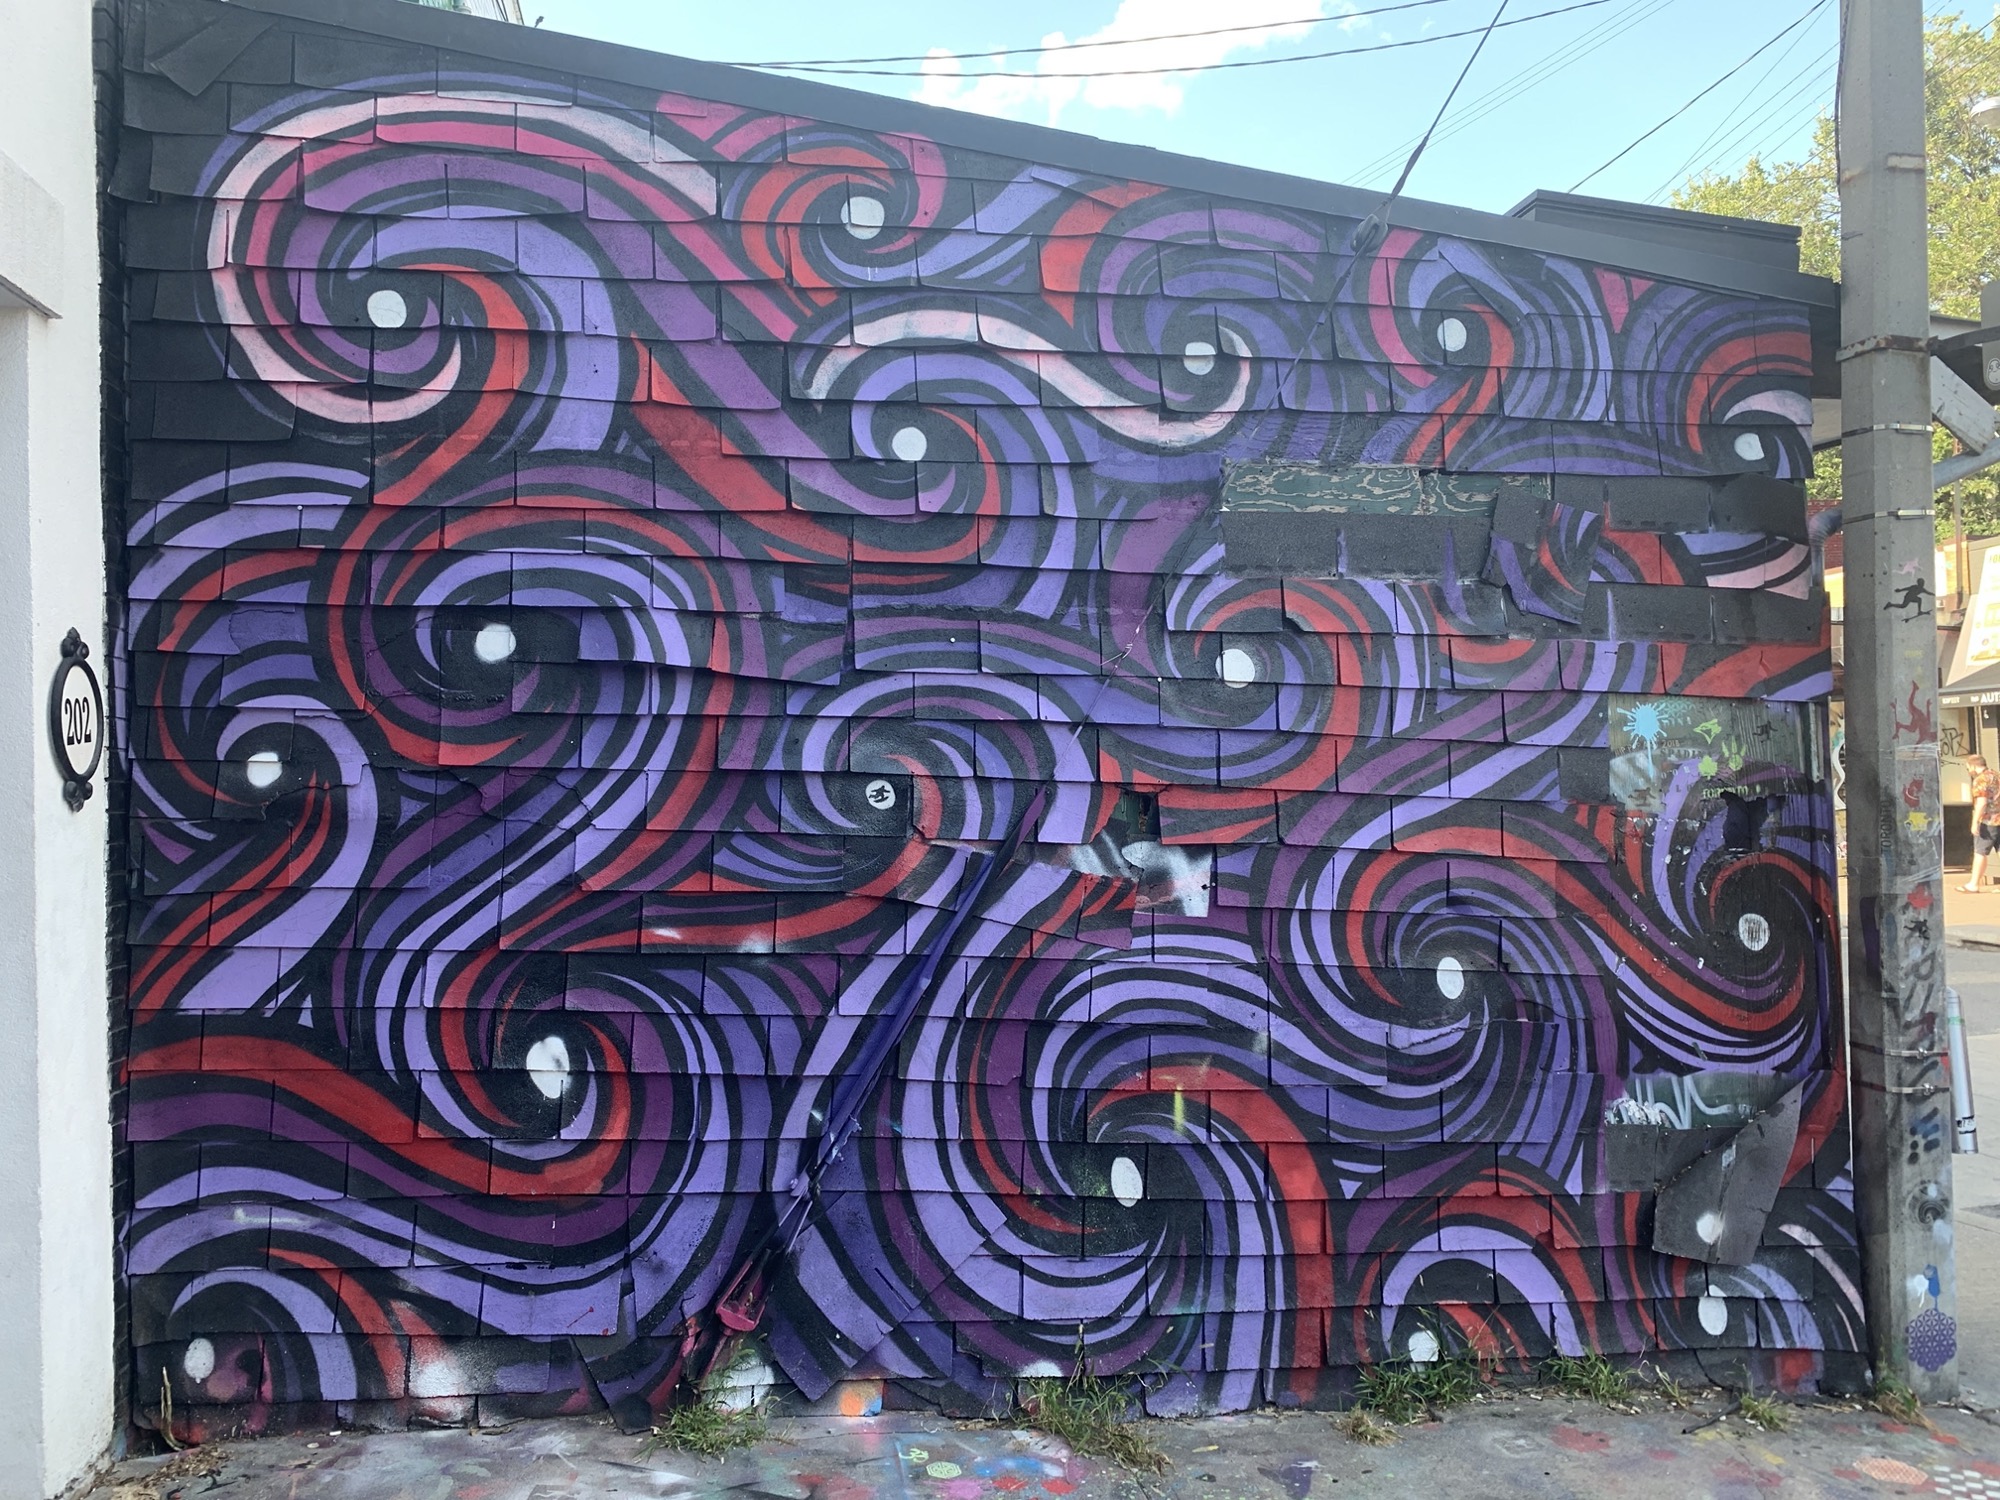 Graffiti 2422  captured by Rabot in Toronto Canada